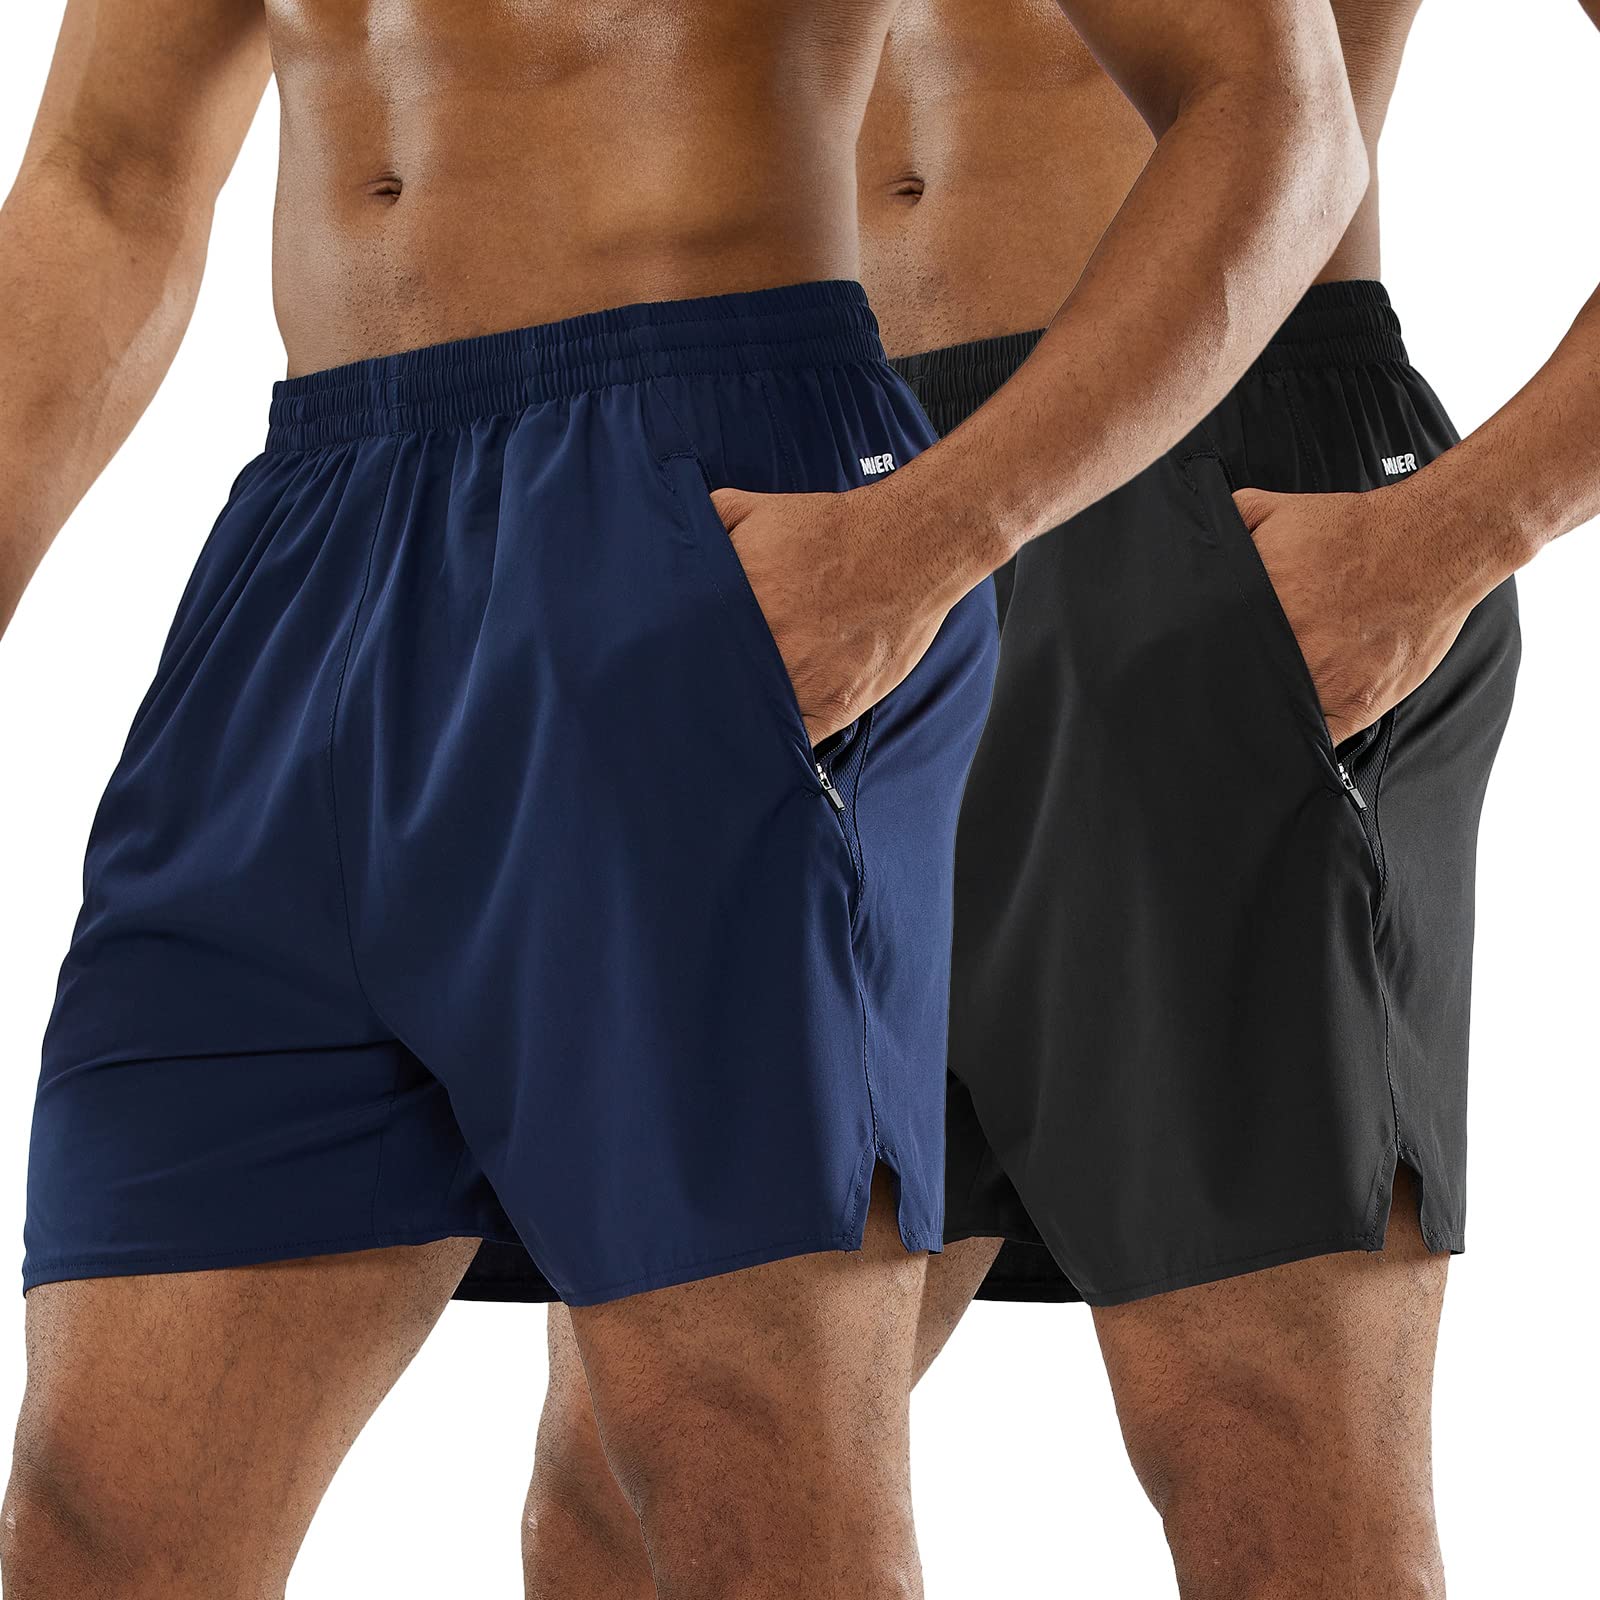 Men's Workout 5 Inches Running Shorts with Zipper Pockets